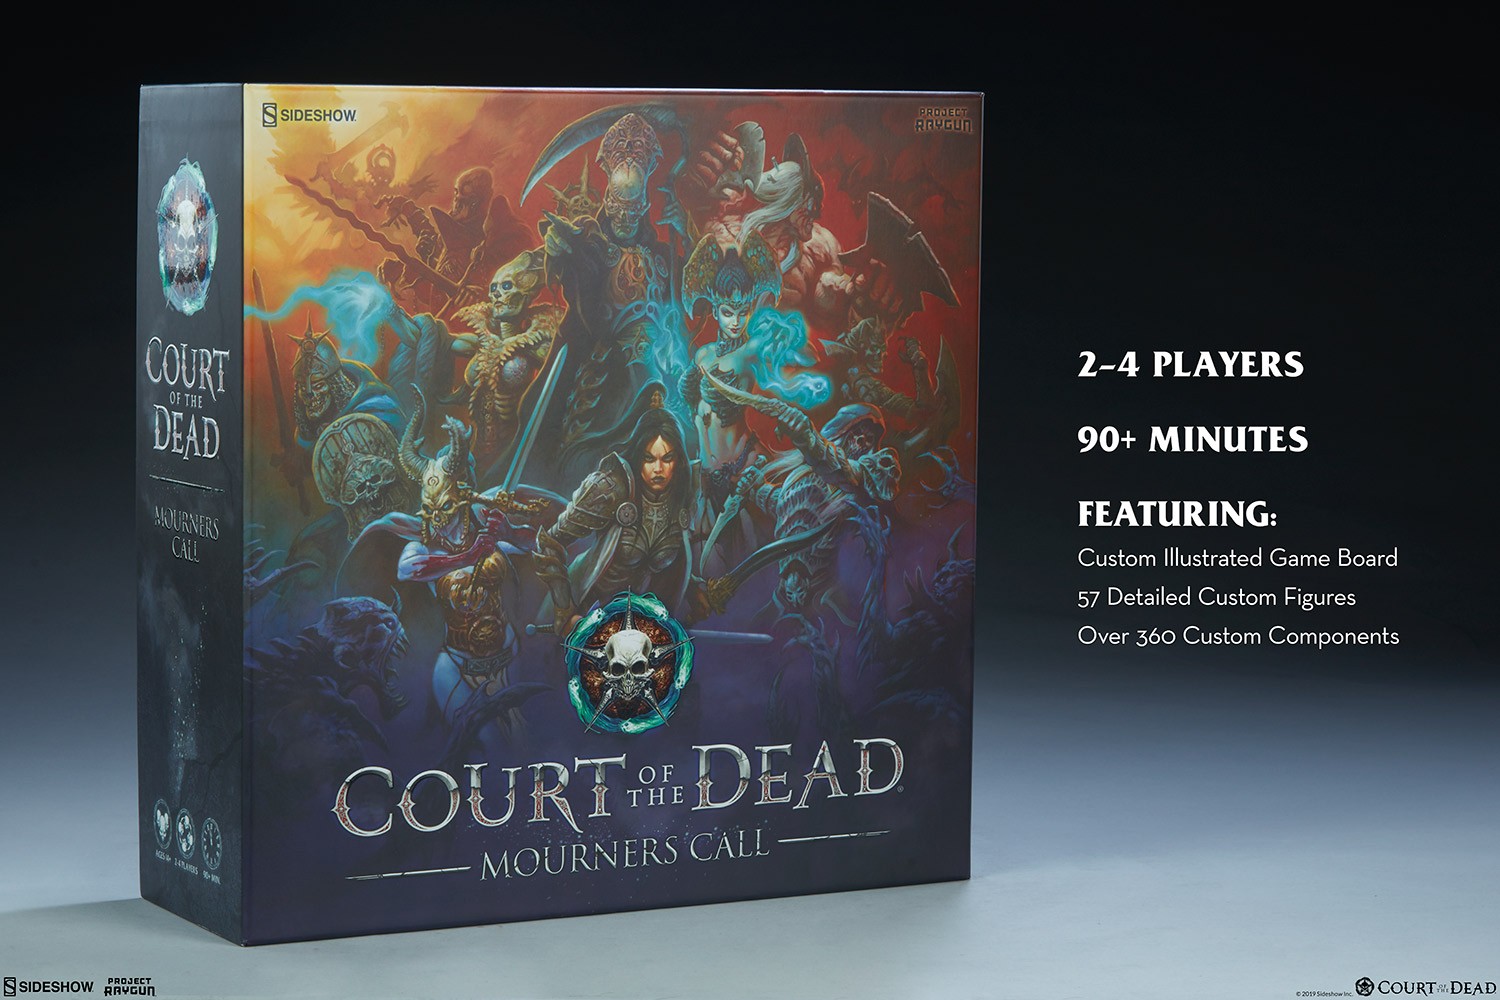 Court of the Dead Mourner's Call Game Collector Edition (Prototype Shown) View 1